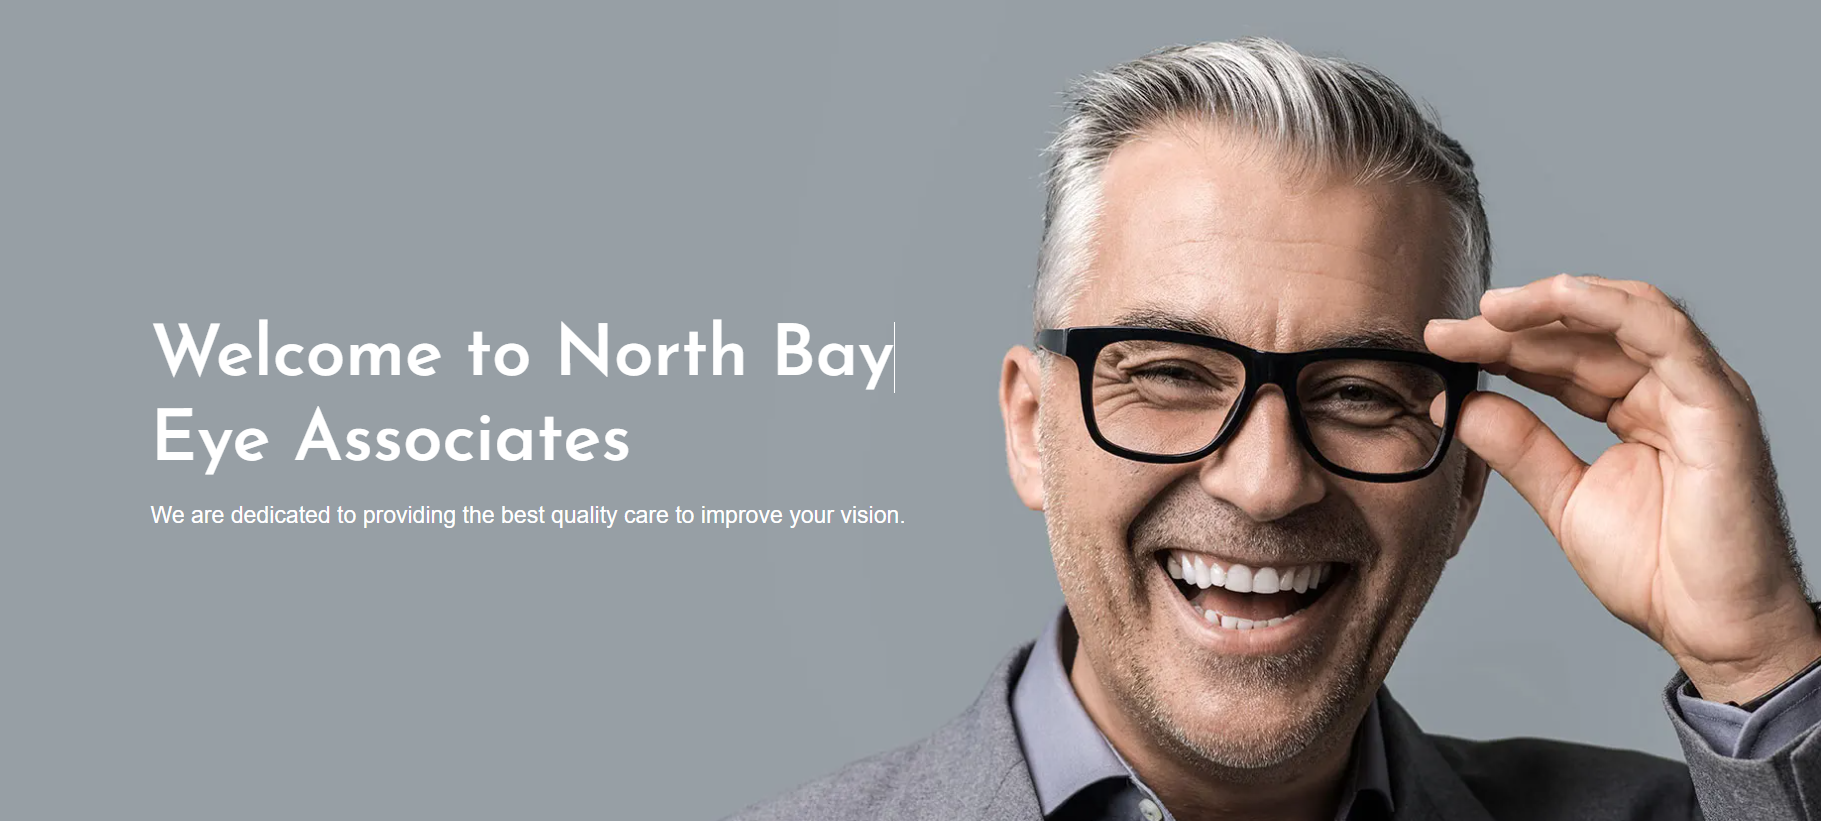 North Bay Eye Associates | Ophthalmologists | Eye Exams in NorCal